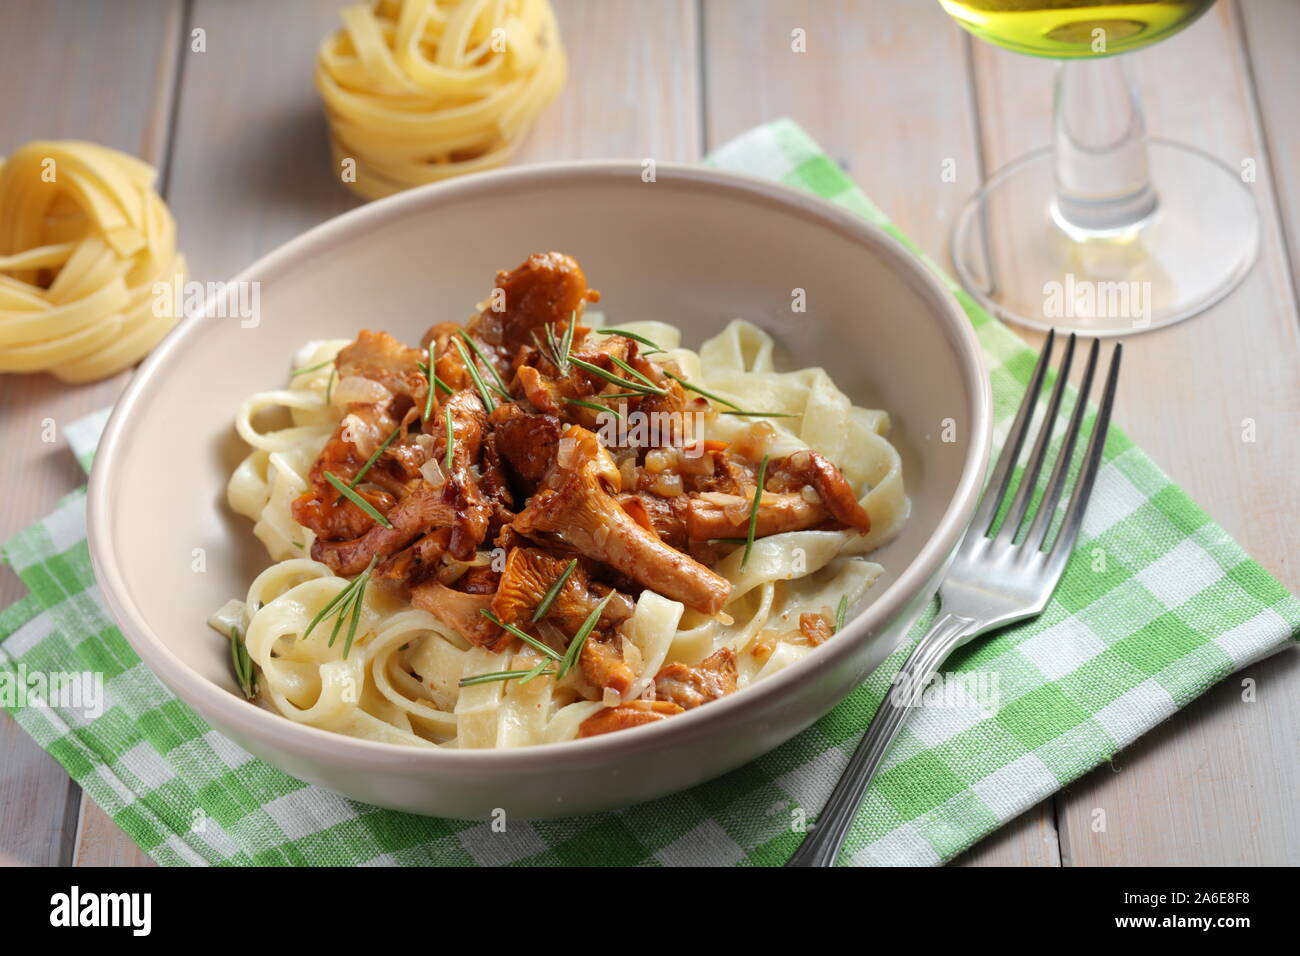 Fettuccine pasta with Chanterelle mushrooms and rosemary on a rustic table Stock Photo